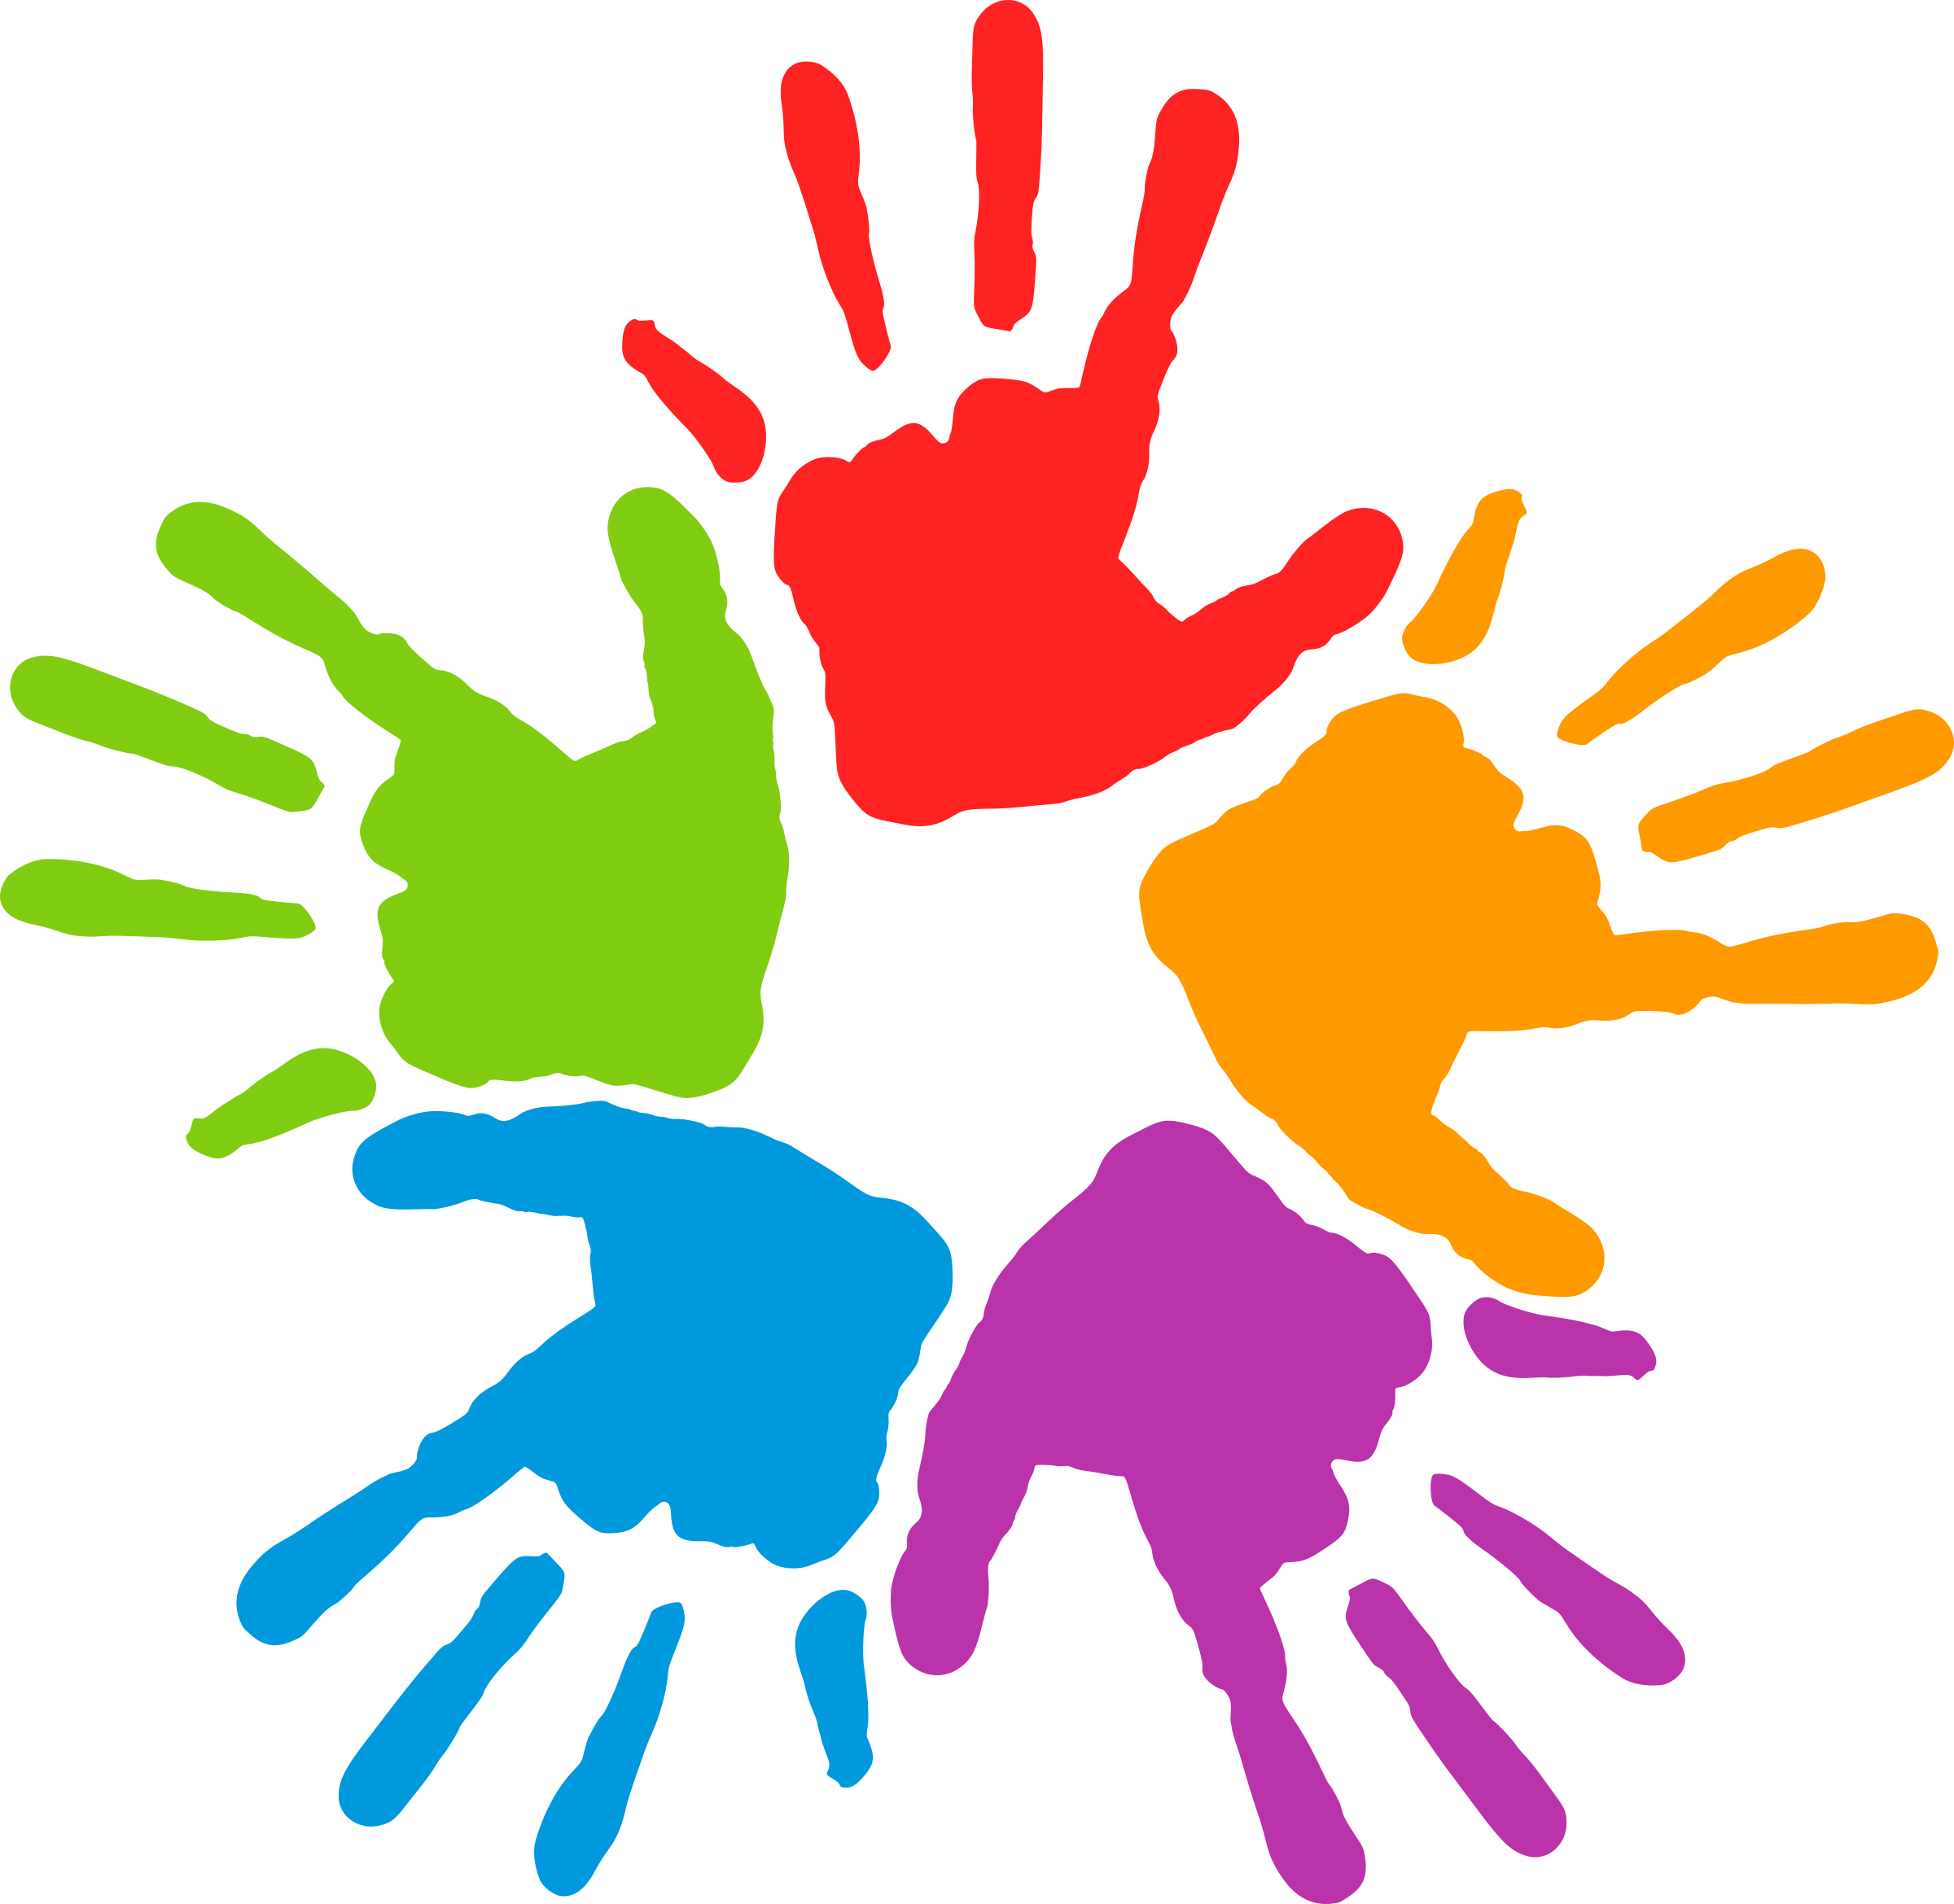 Creative clipart rainbow hand. Mans by fofo hands